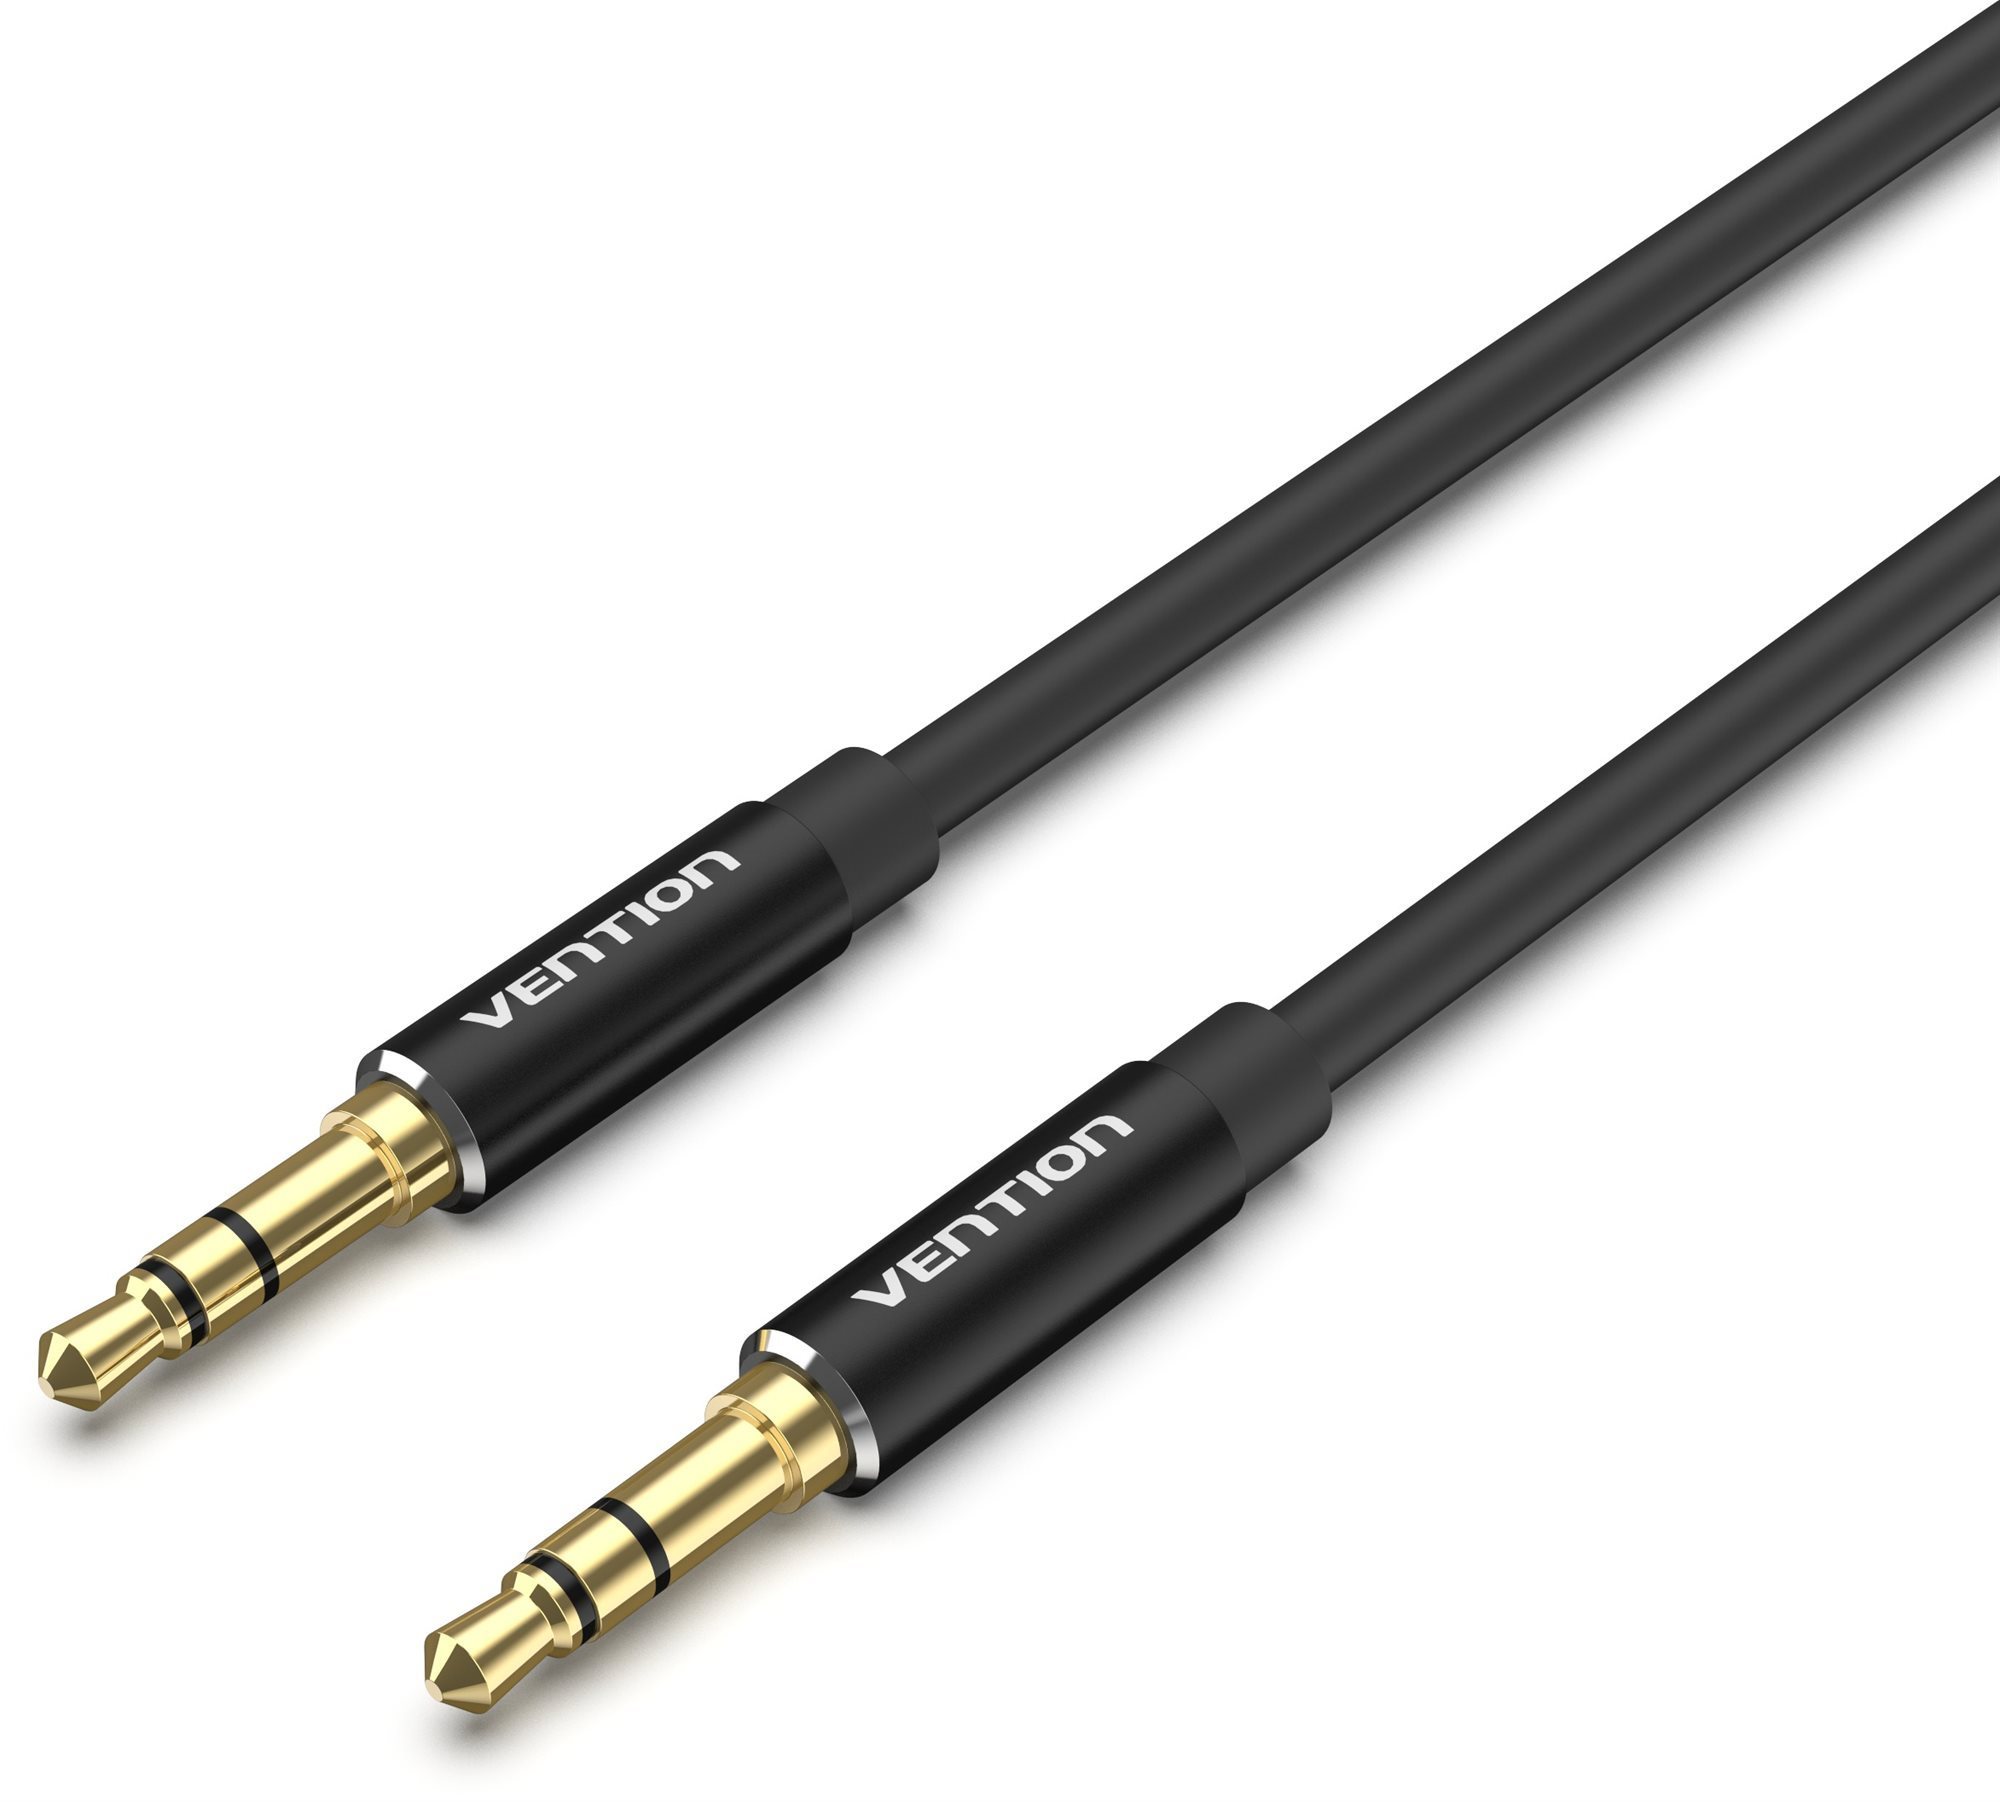 Vention 3,5 mm Male to Male Audio Cable 1 m Black Aluminum Alloy Type